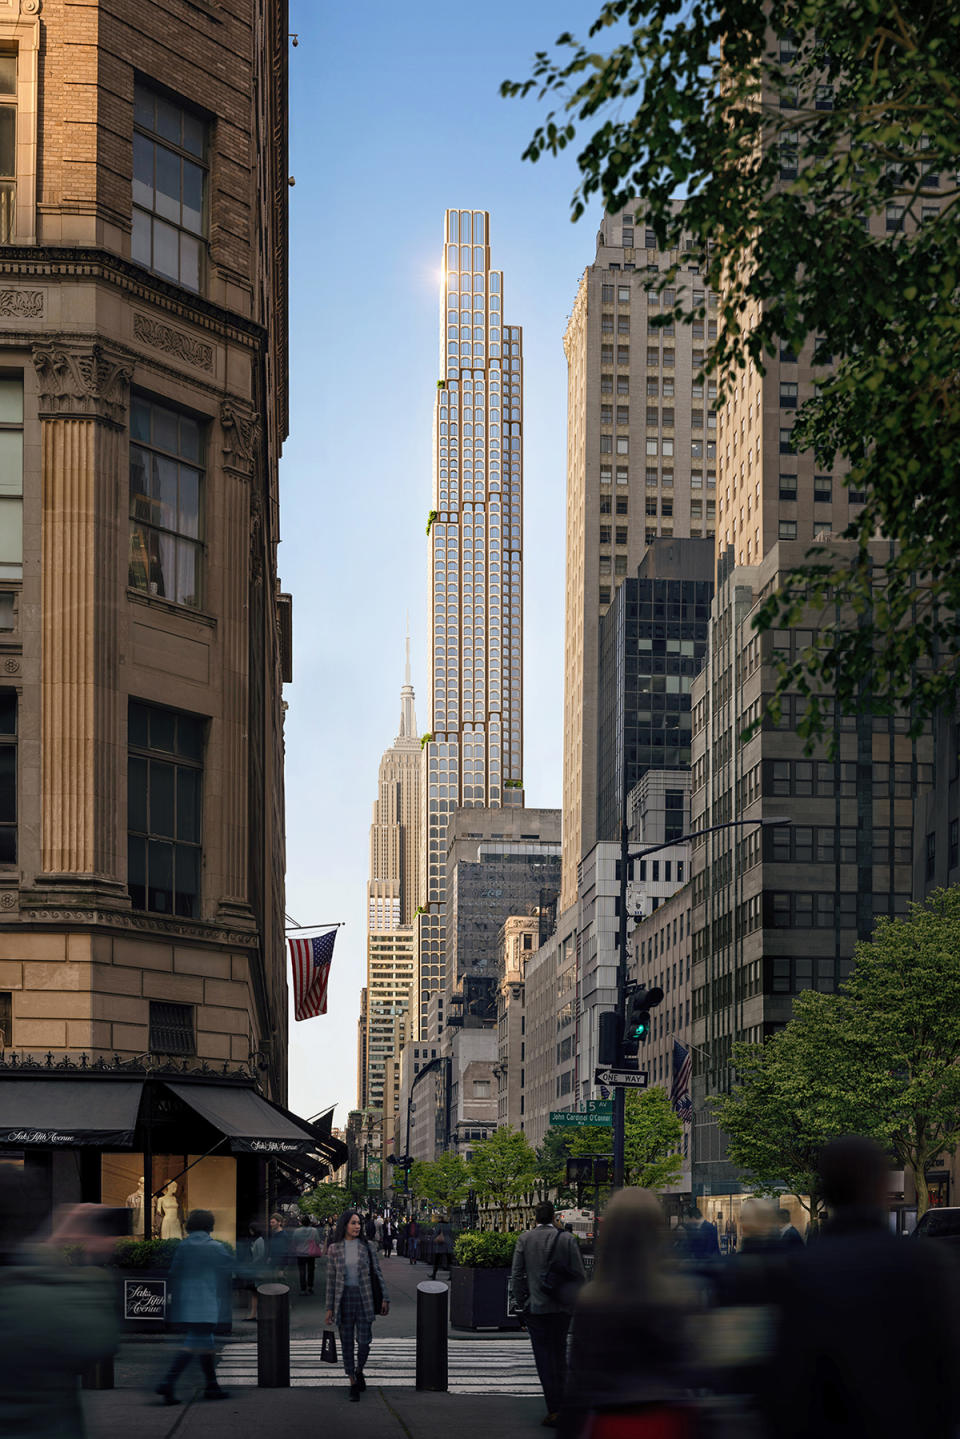 A long-distance view of the striking tower at 520 Fifth Avenue.